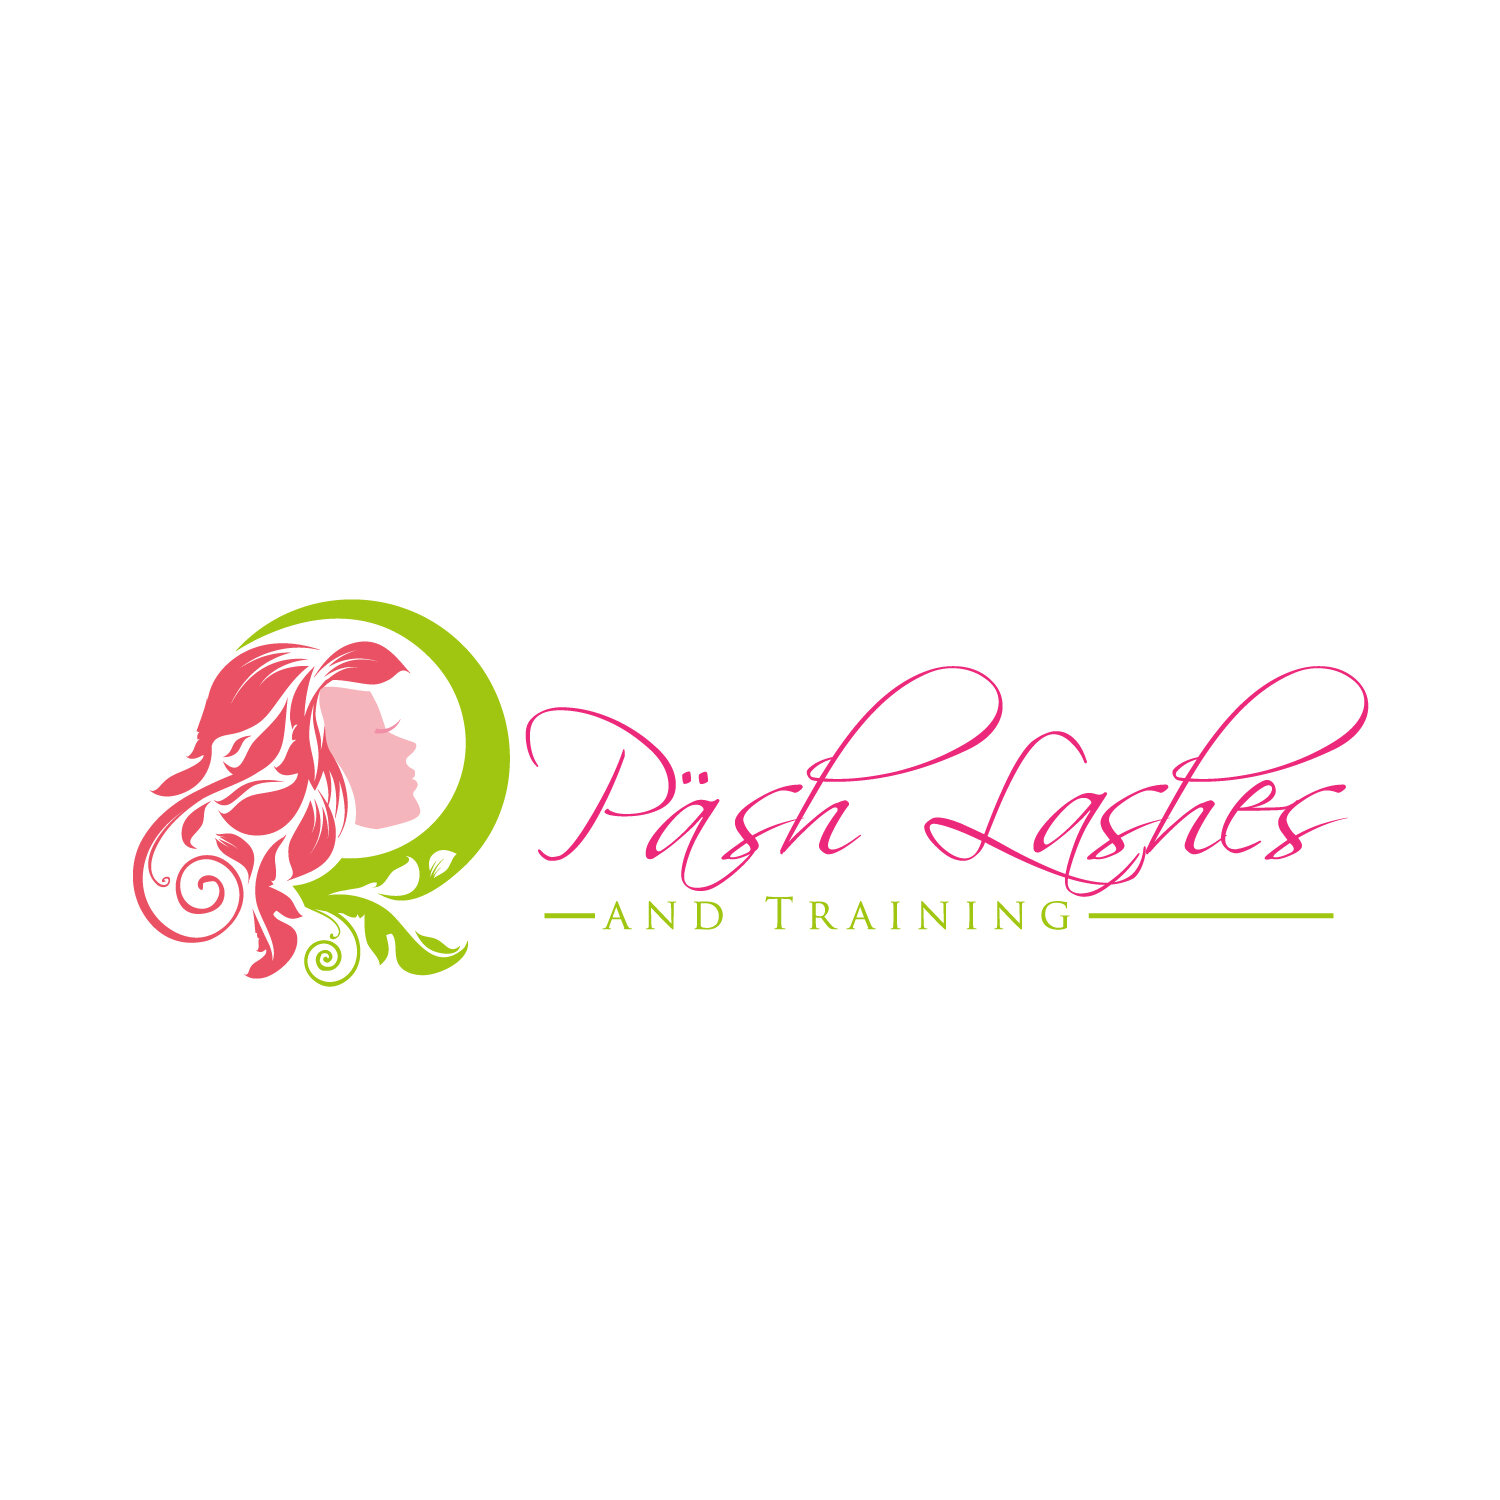 Pash Lashes and Training